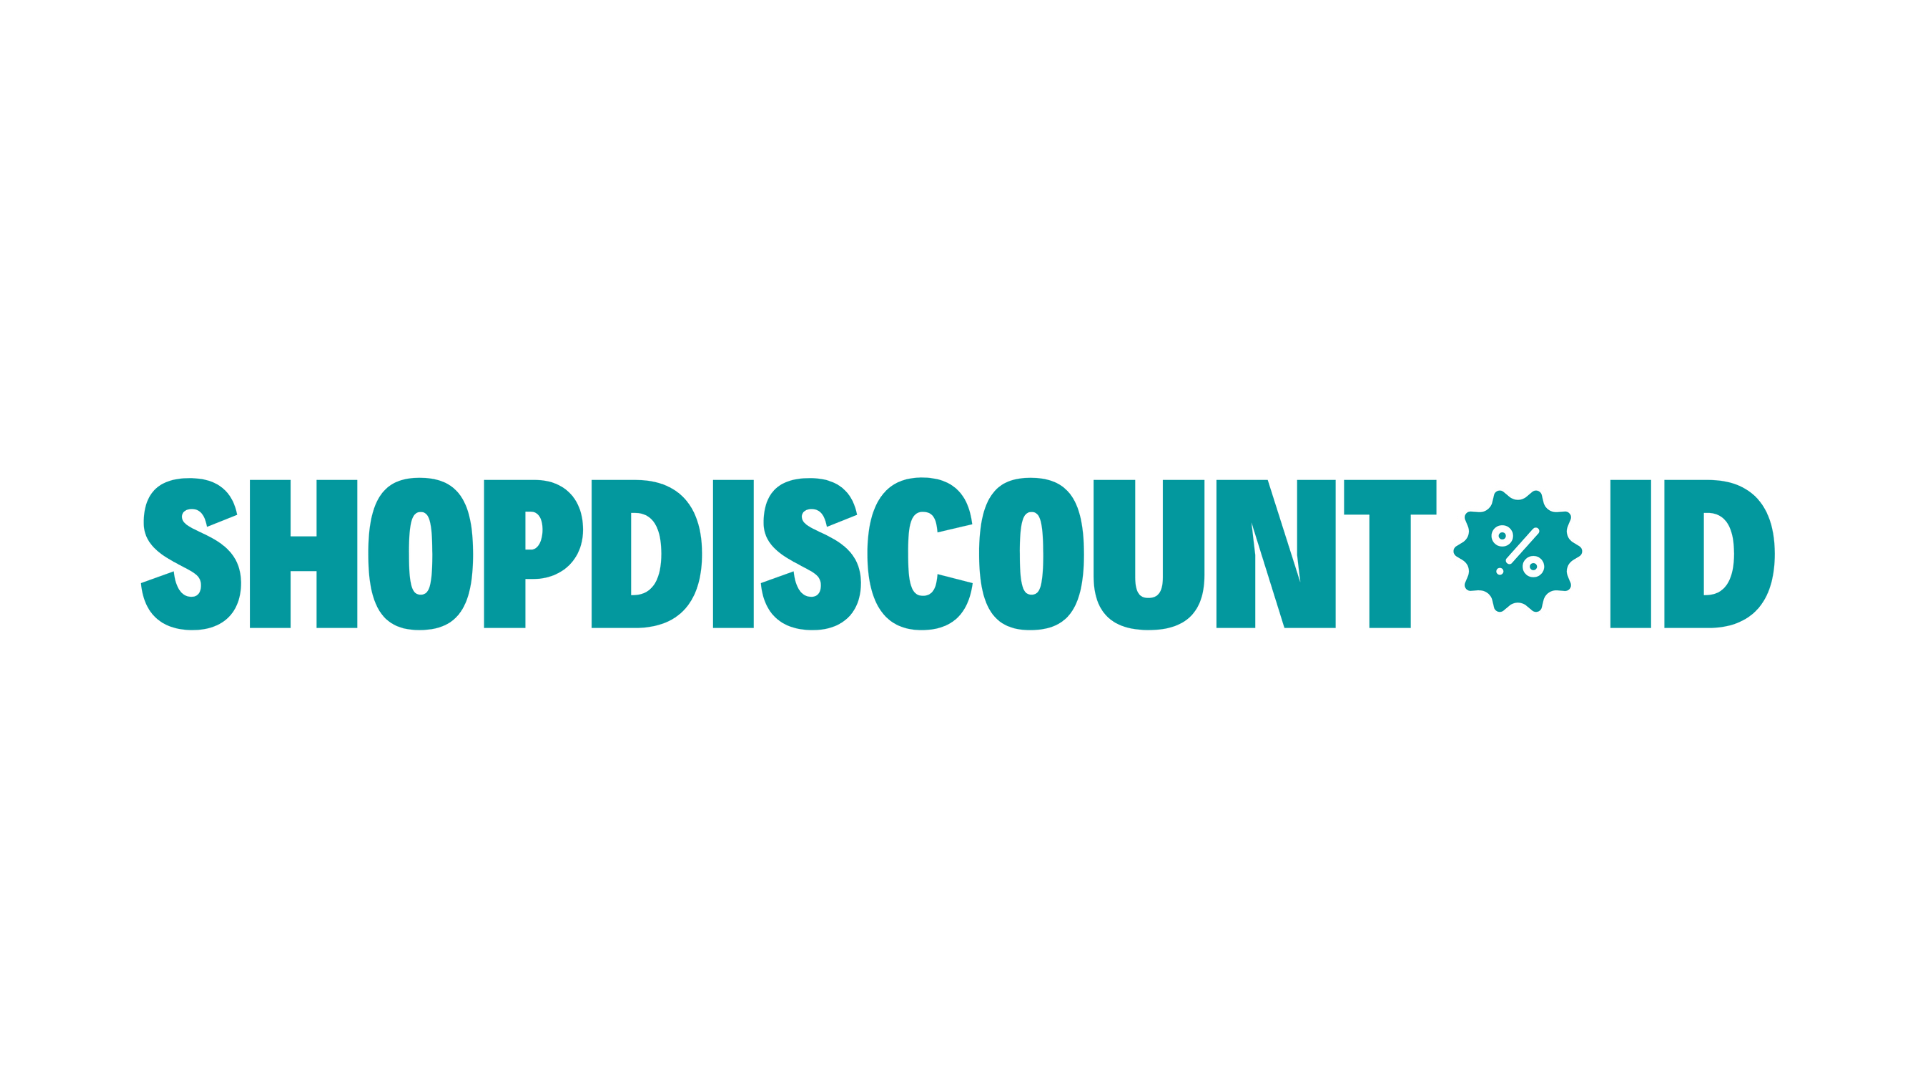 Shopdiscount.id